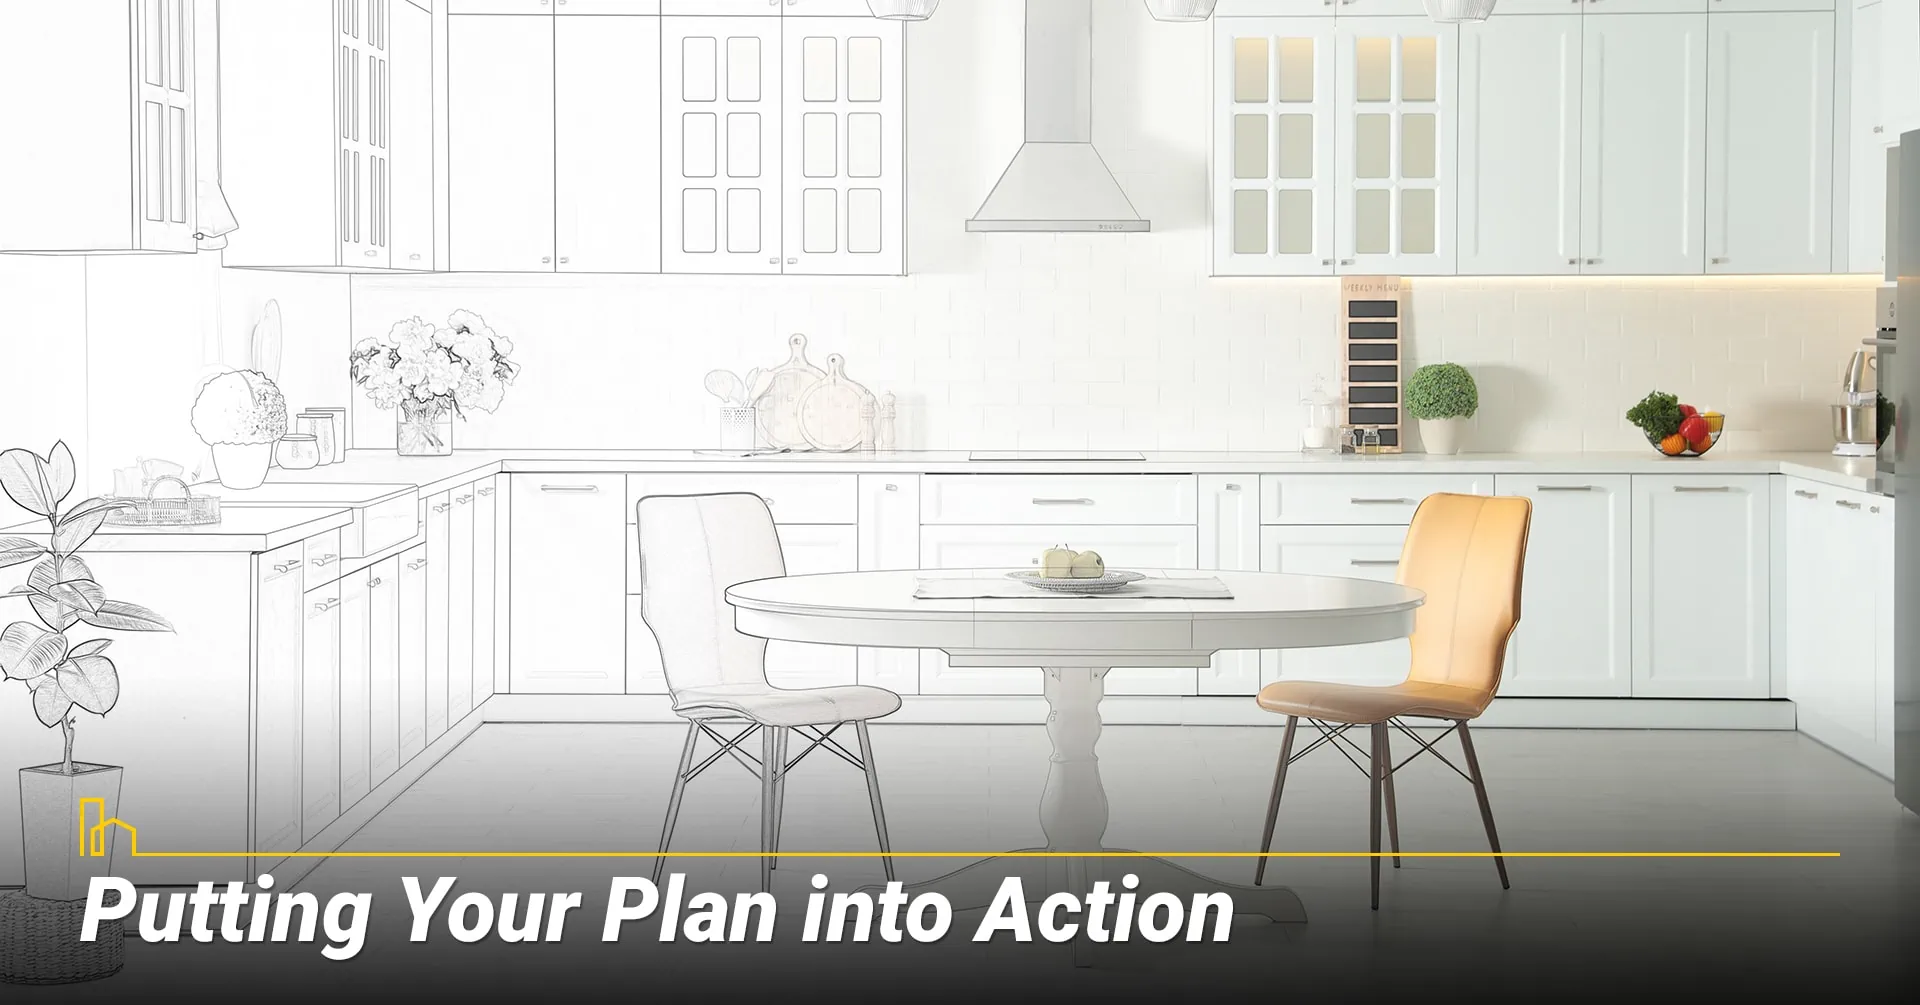 Putting Your Plan into Action